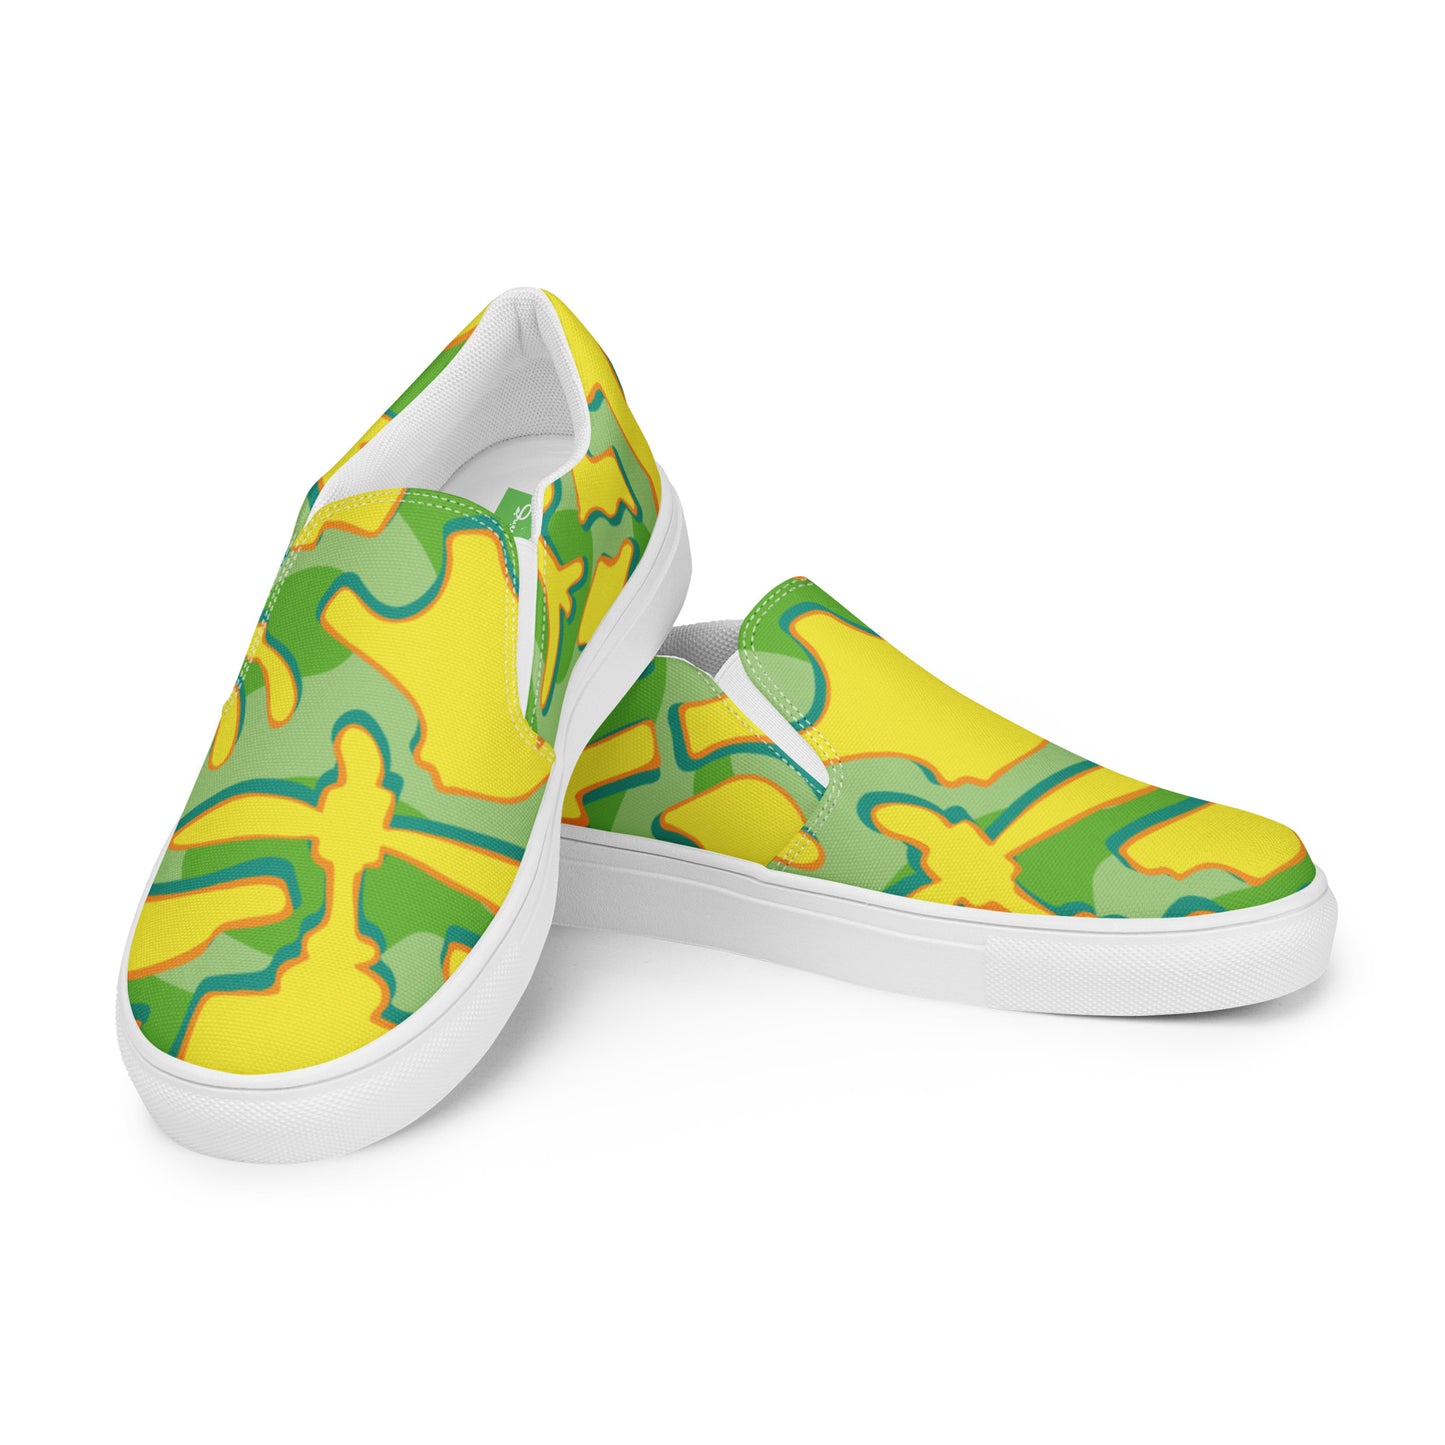 BLIMEY LIMEY by DOLVING - Women’s slip-on canvas shoes